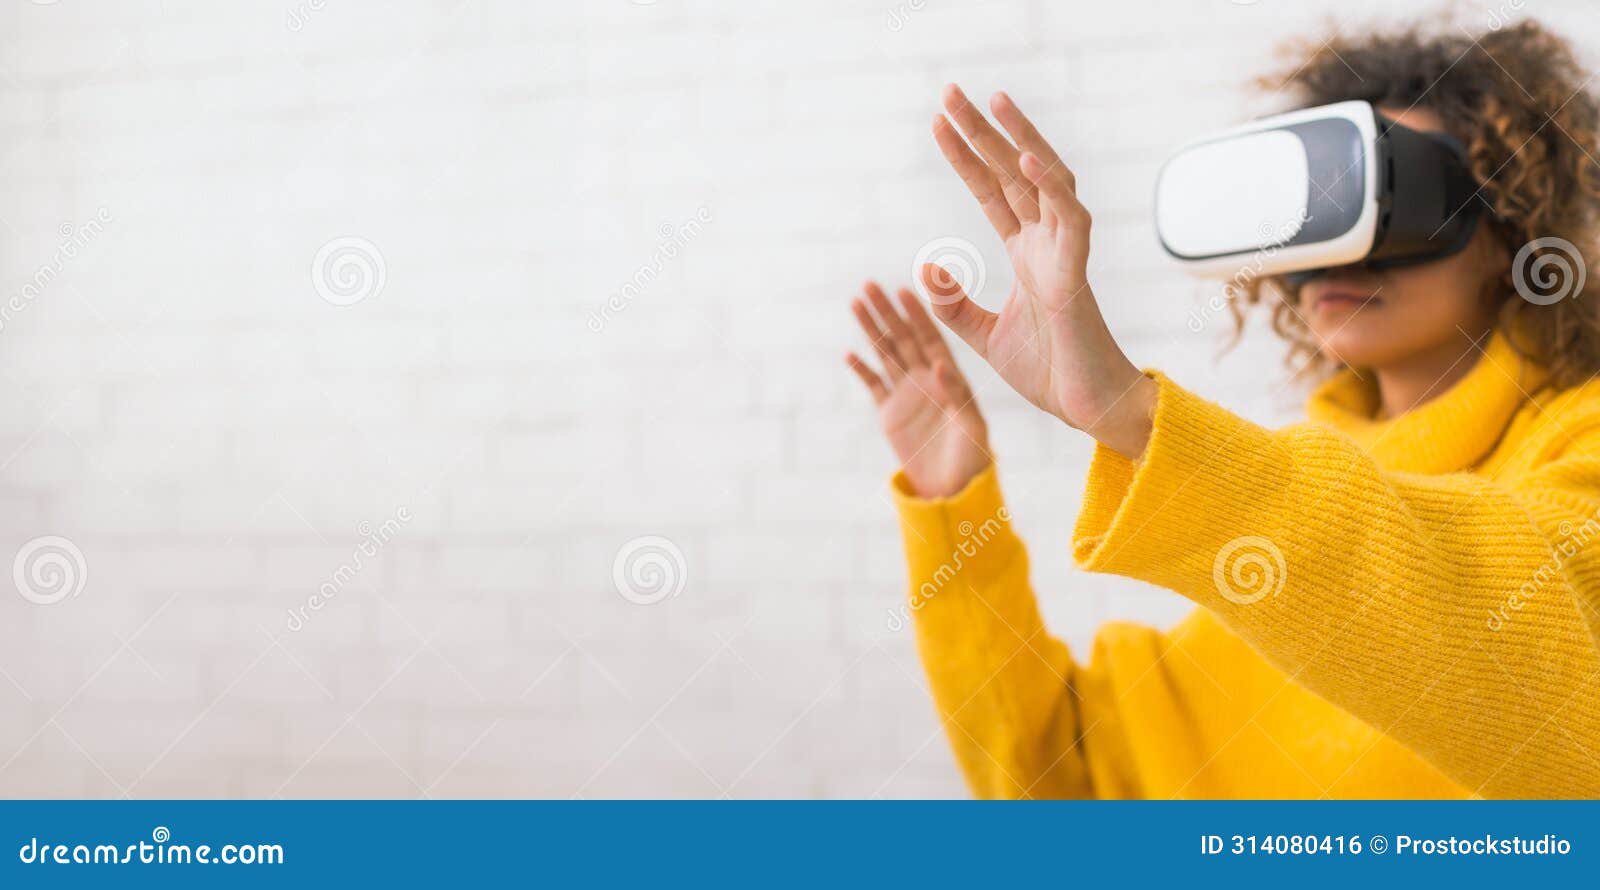 future is now. woman using vr headset and gesticulating